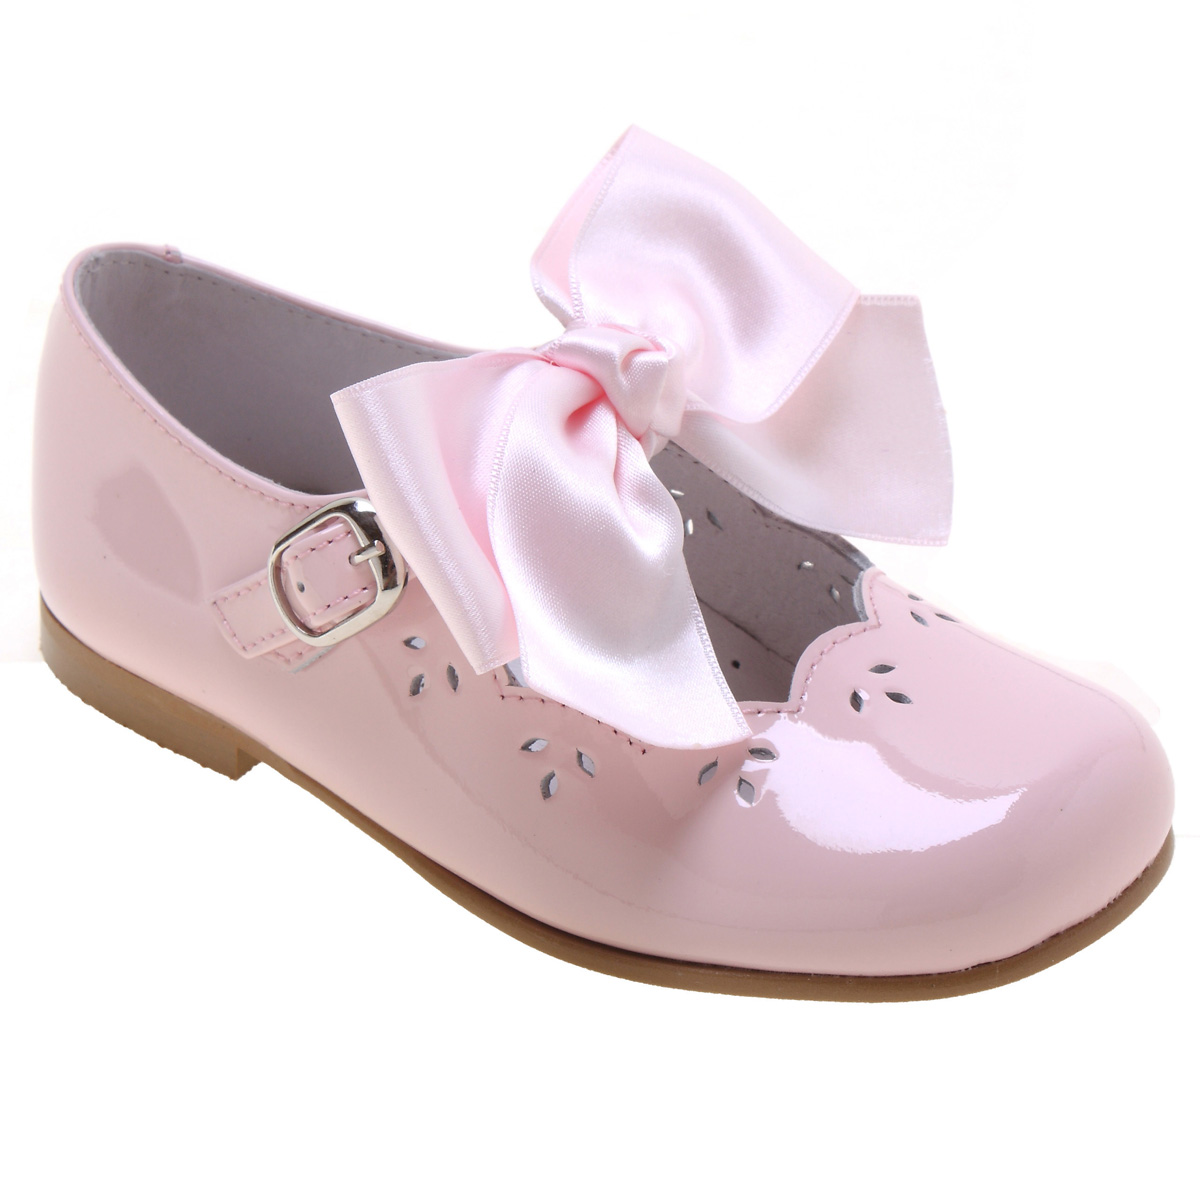 Shoes Girls Shoes Mary Janes Baby girls Spanish style patent shoes Mary Jane pink white camel red navy UK 1-8 